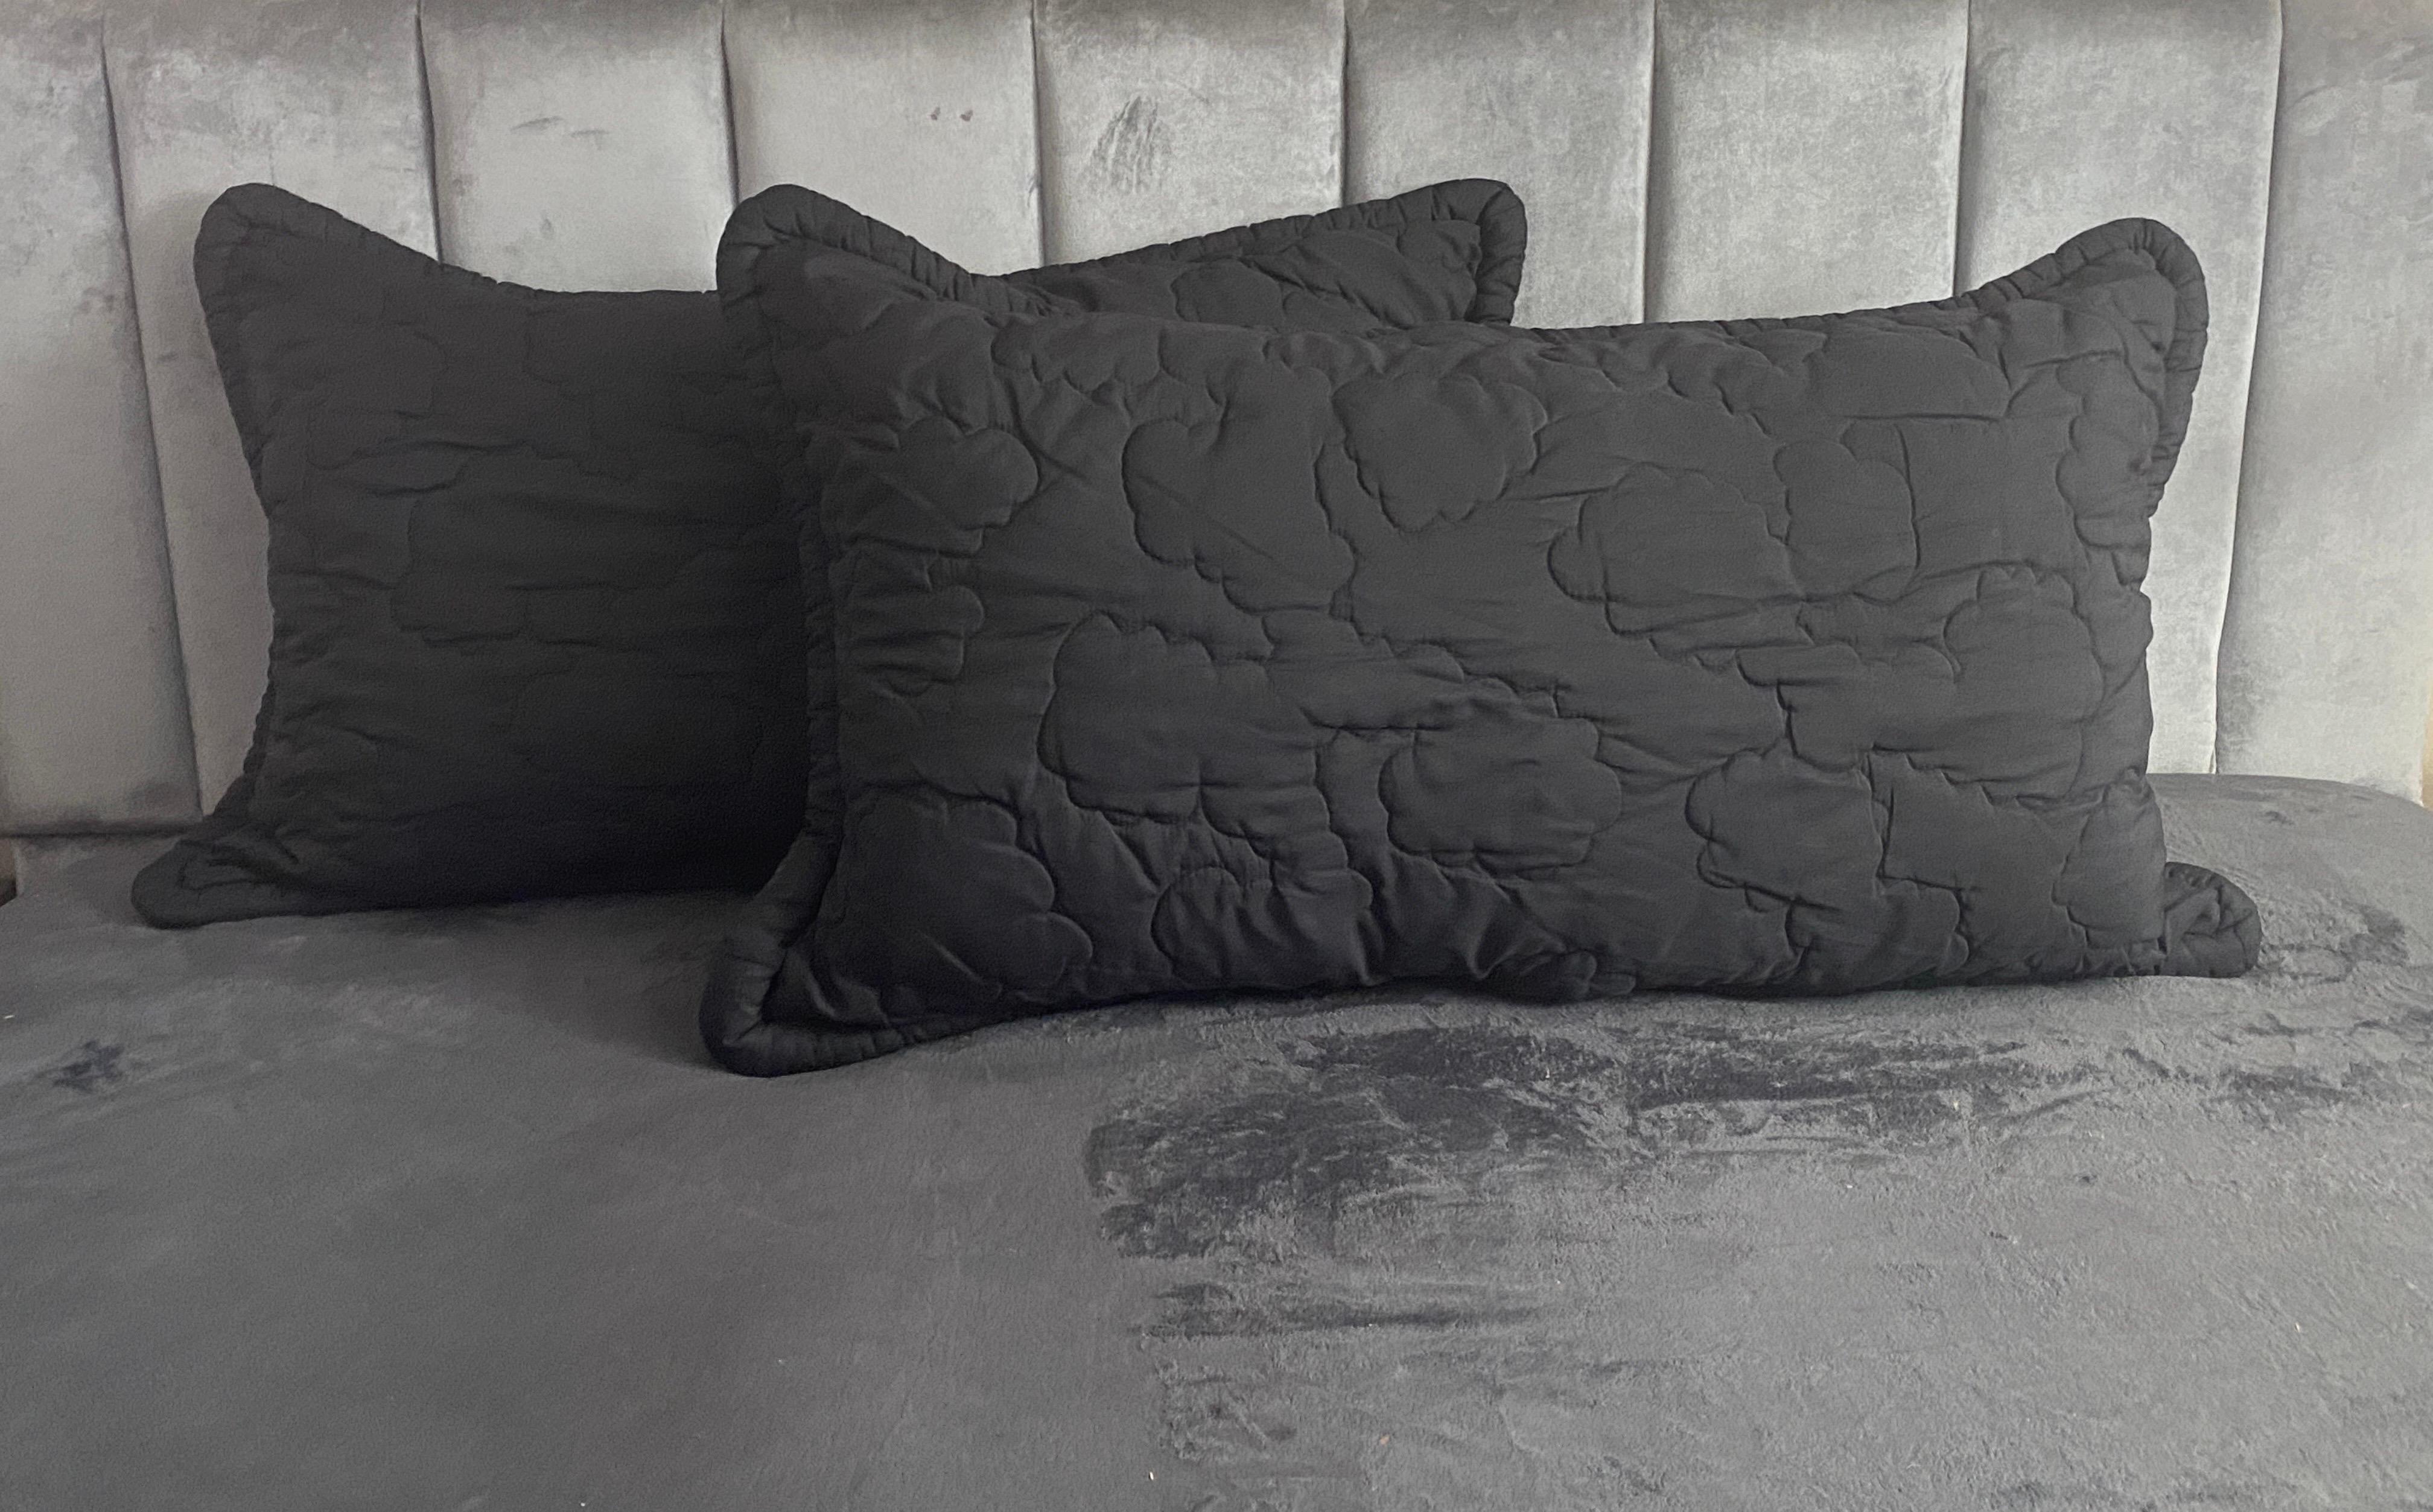 This rare pair of quilted black, king-size pillow shams came from Bloomingdale’s New York in the 1980s as part of the all, upholsterd, mint, green leopard bed designed entirely by legendary interior designer Mr. Jay Spectre. This was part of the